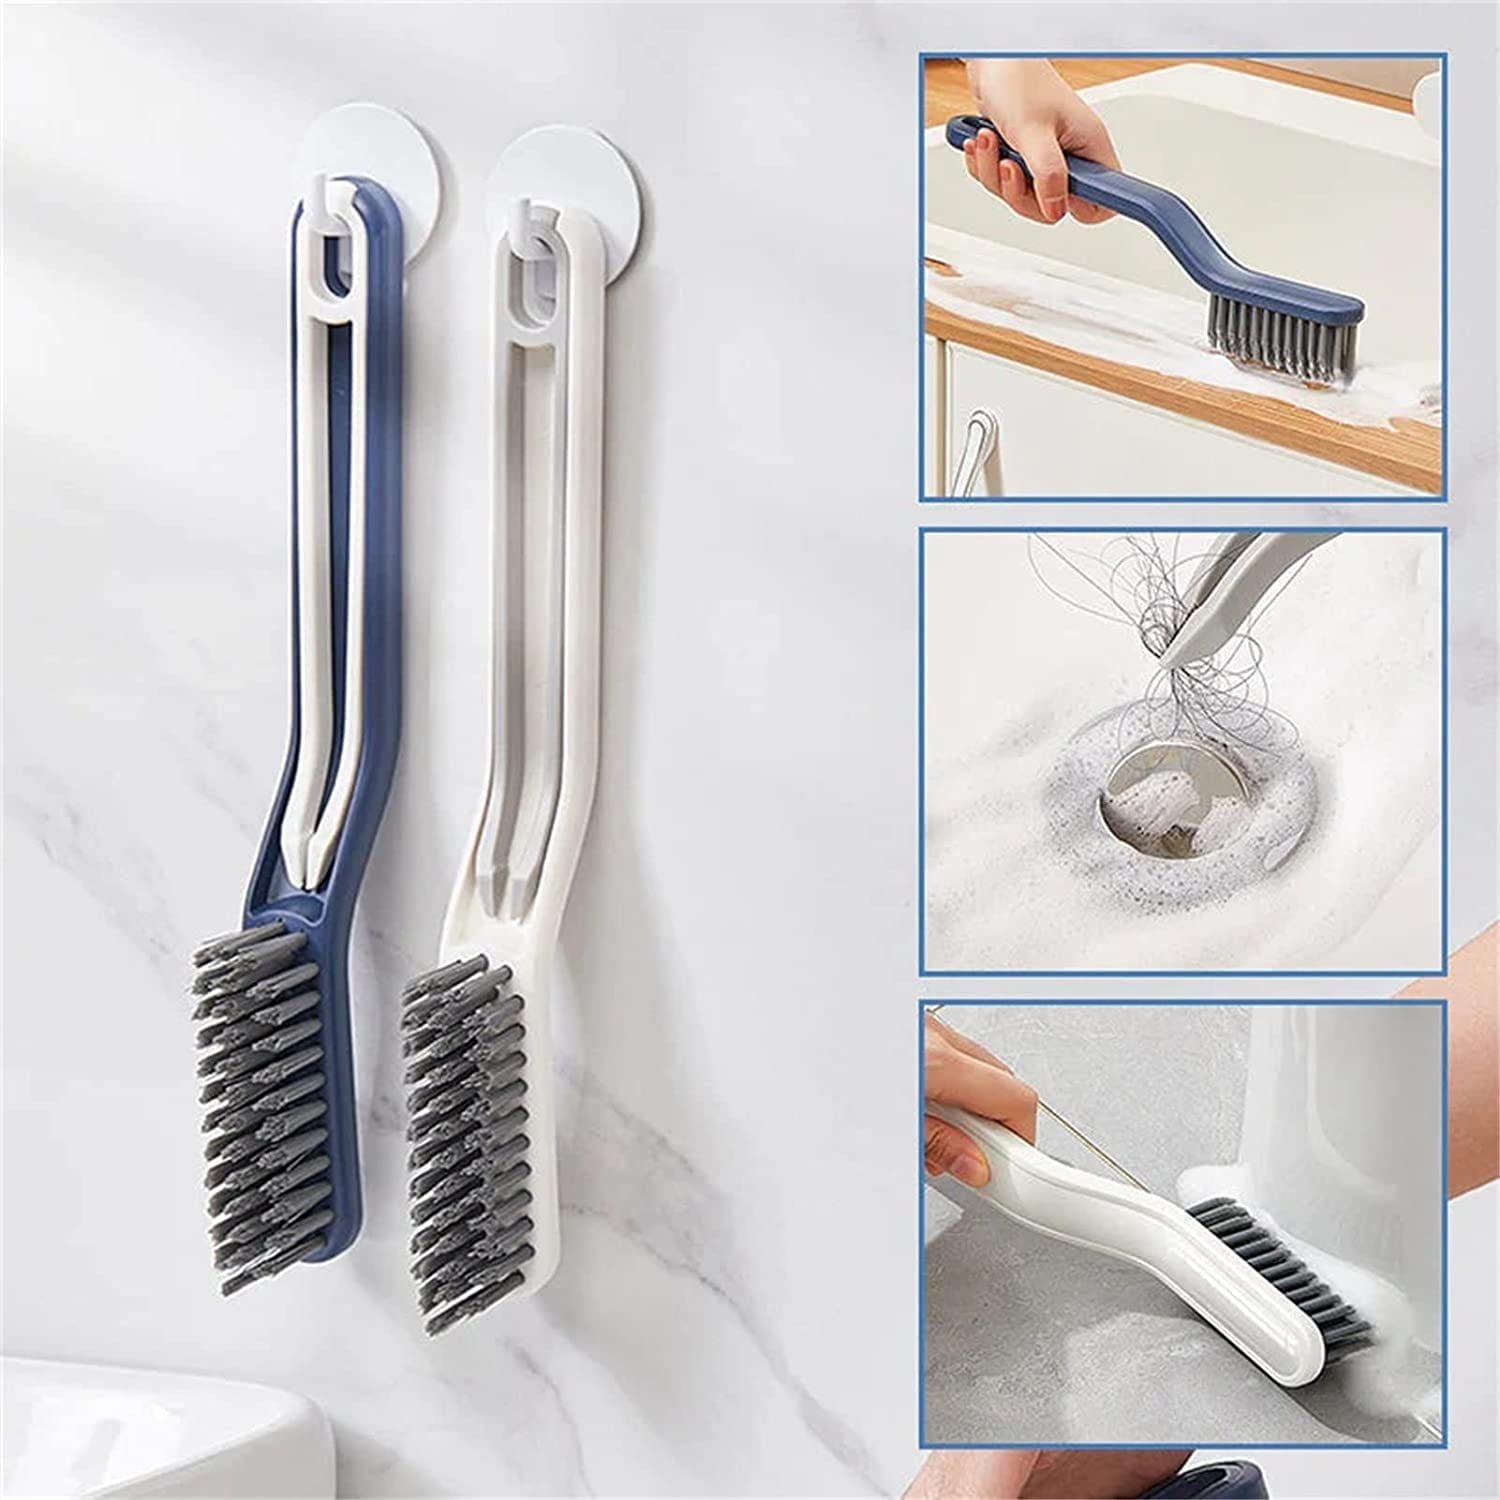 V-shaped Cleaning Brush 2-in-1 Multifunctional Floor Seam Brush Gap  Cleaning Brush Small Clip Brush